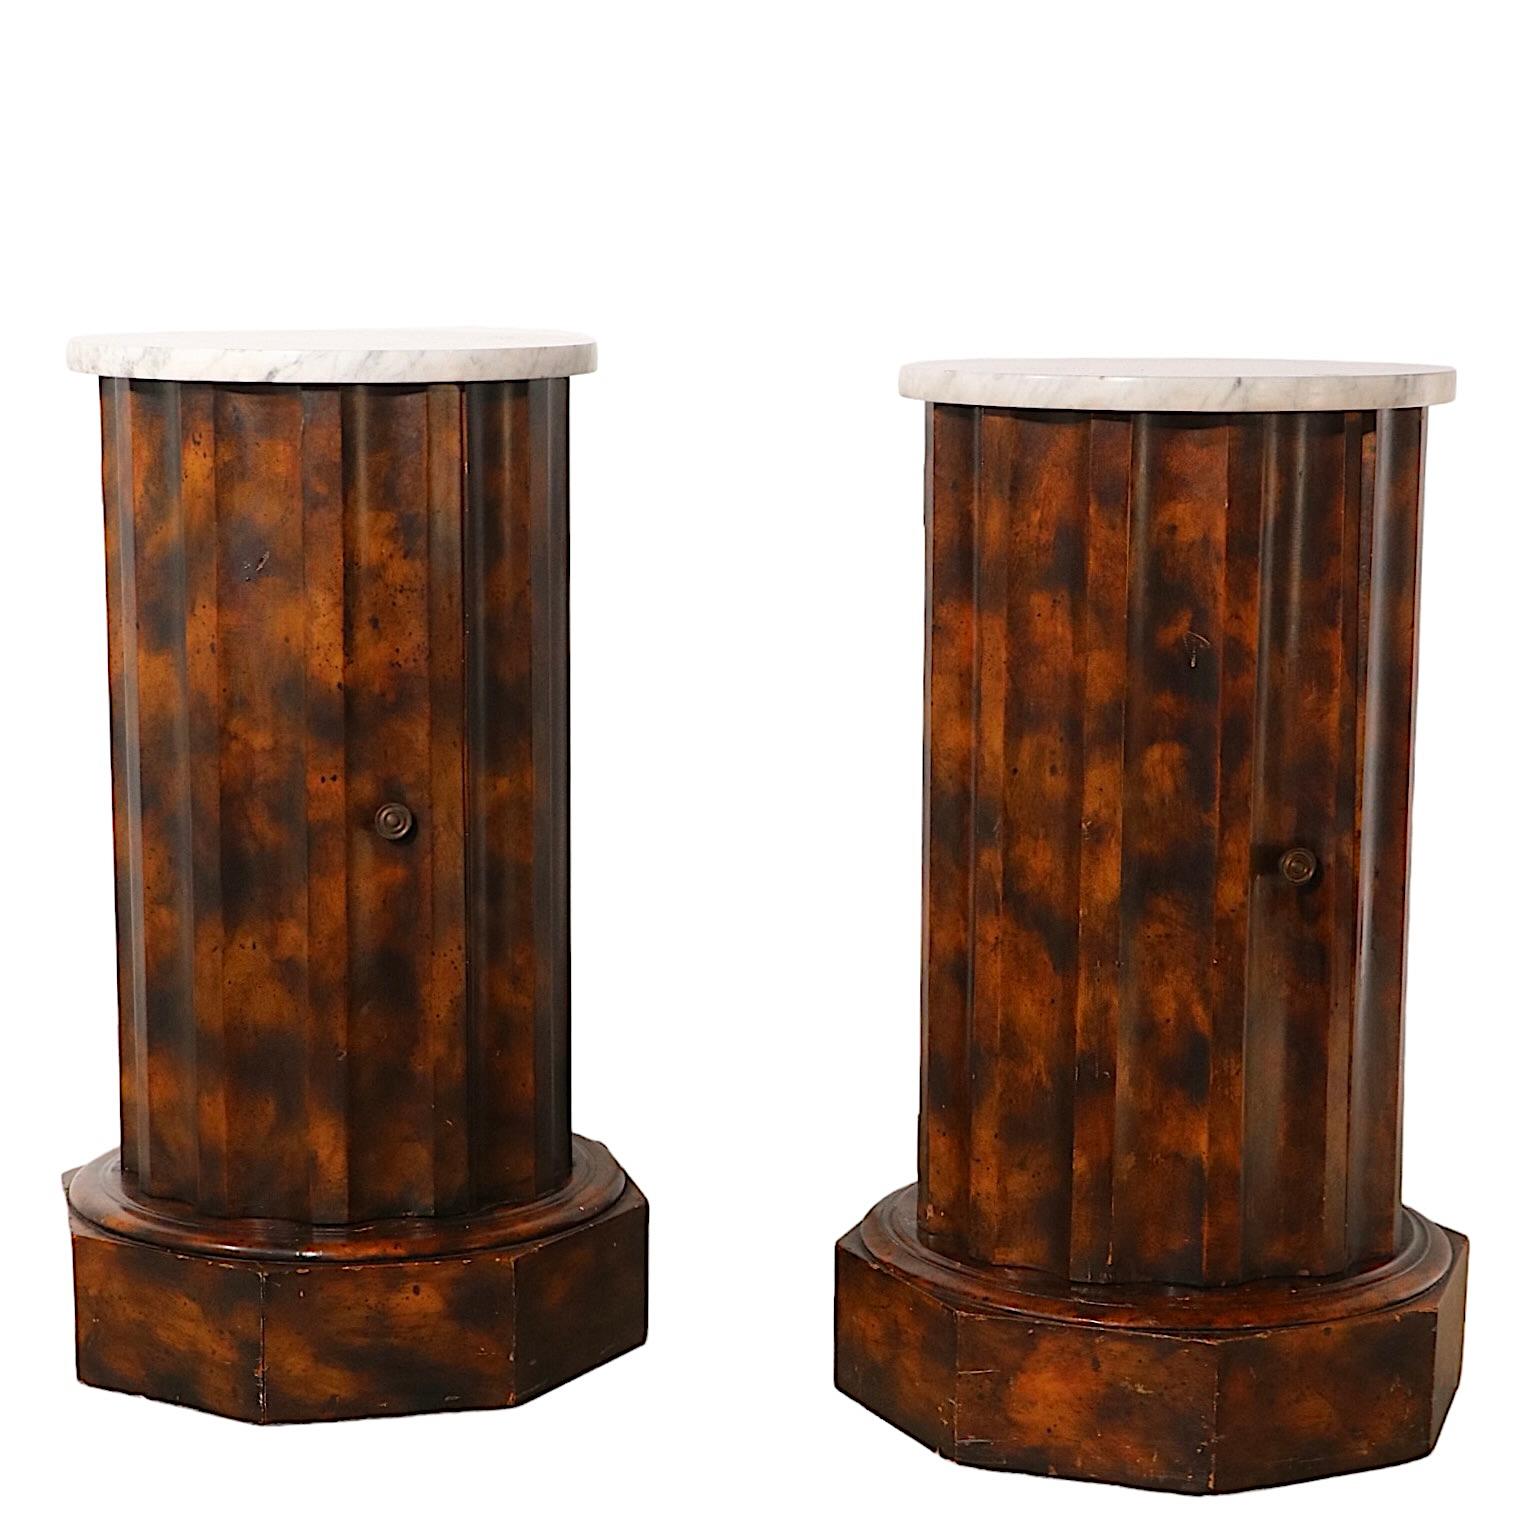 Pr. Decorative Marble Top Half Column Pedestals in Faux Tortoise Shell Finish For Sale 3